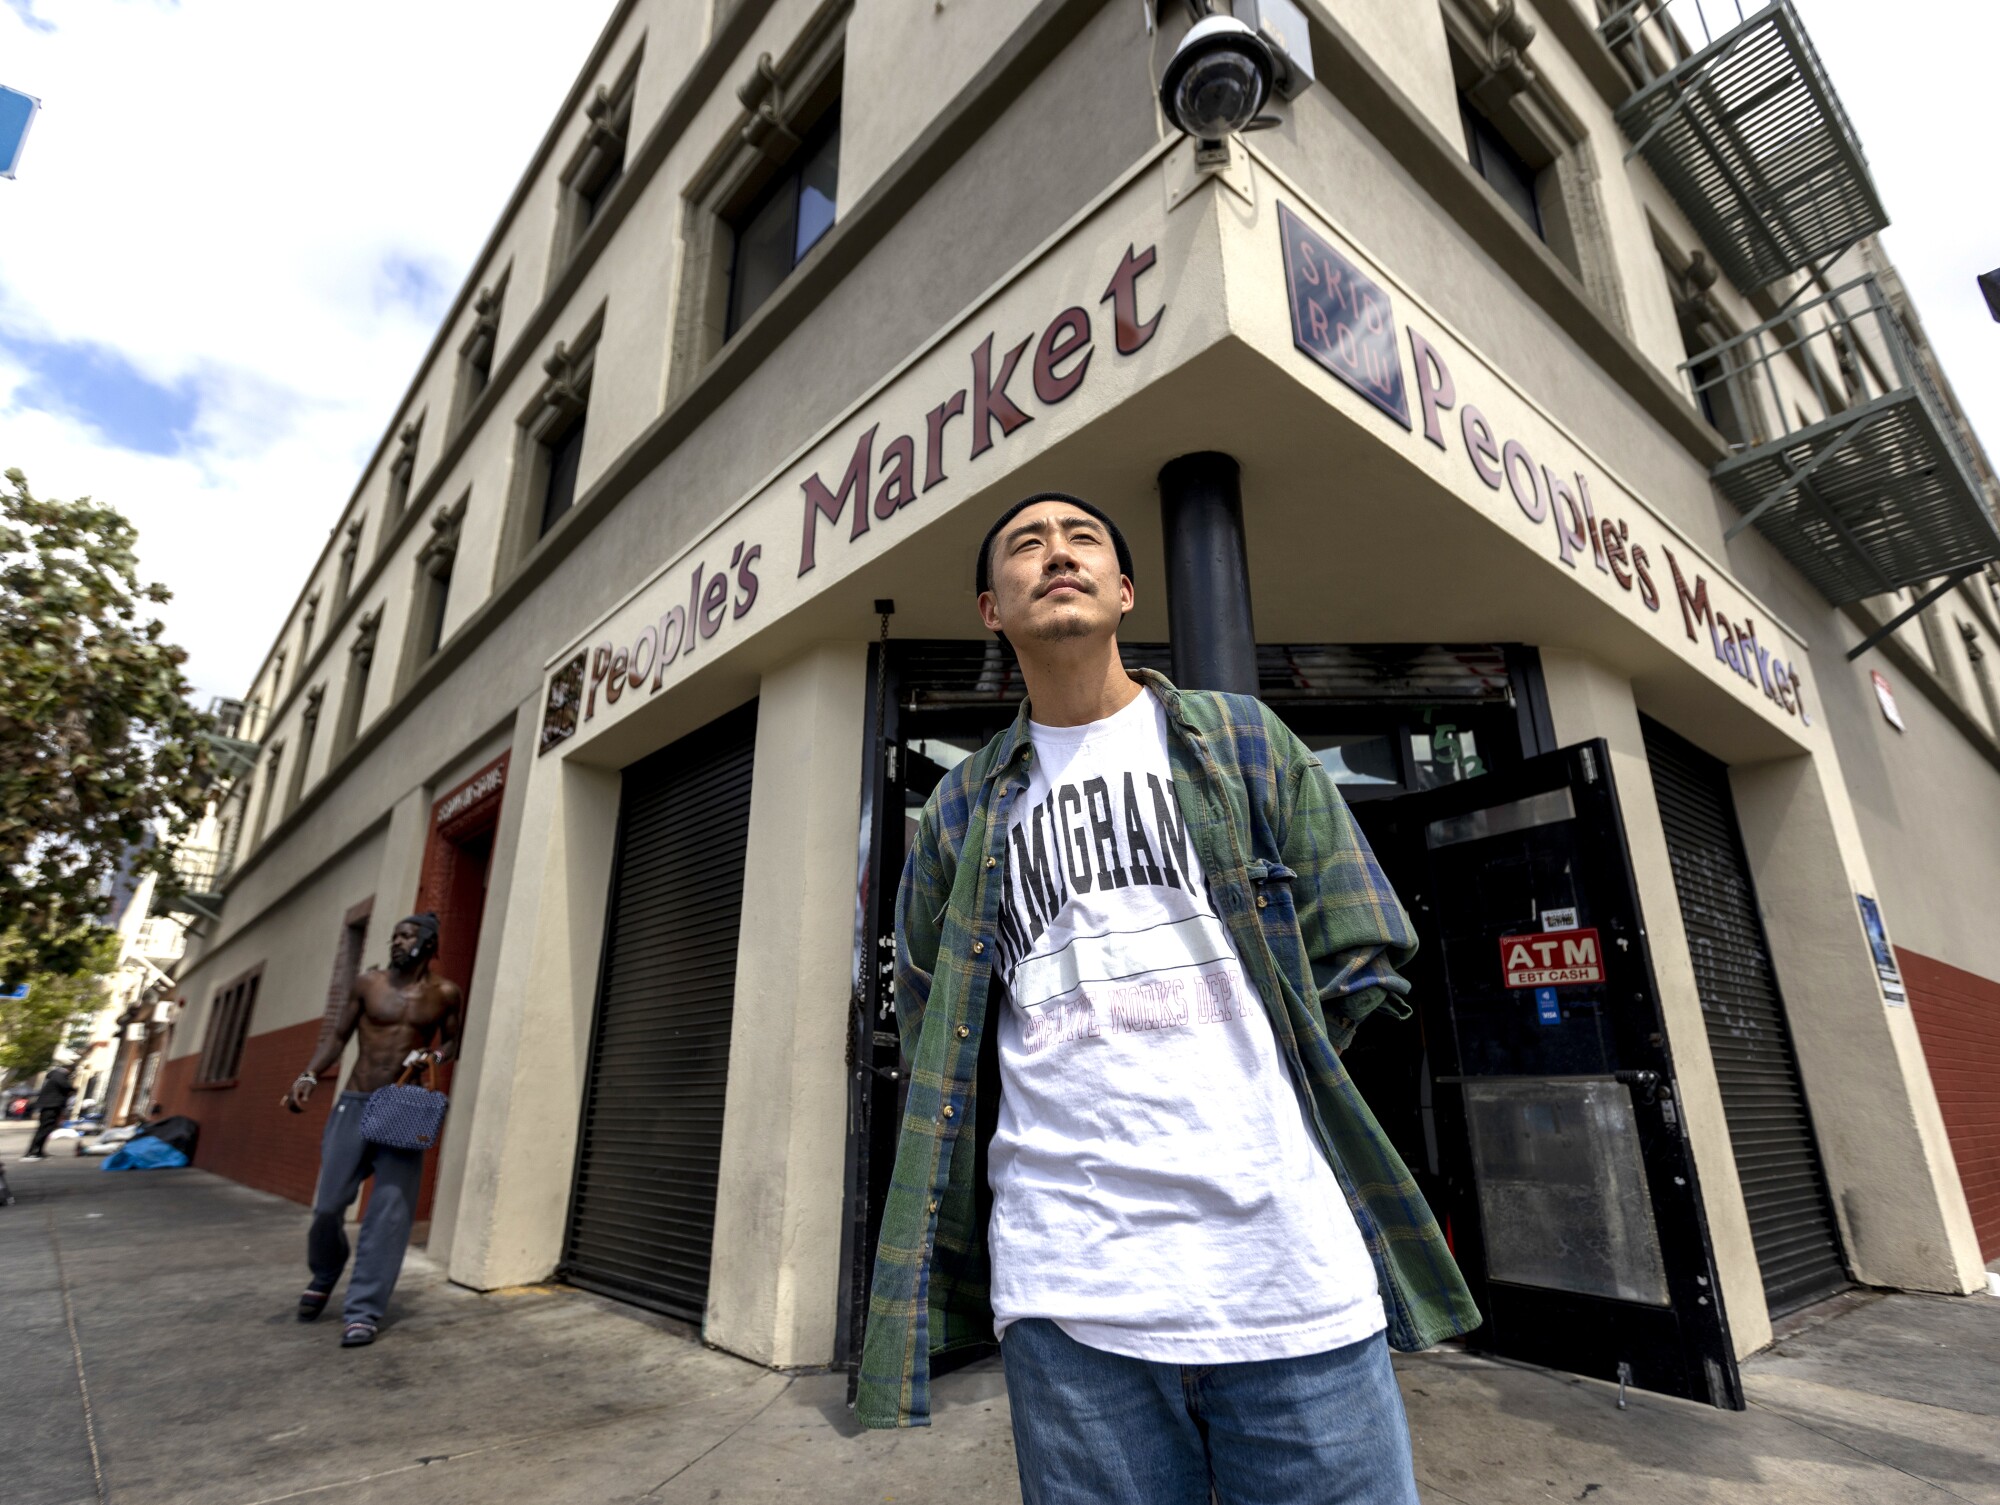 Danny Park stands in front of Skid Row People's Market in Los Angeles.